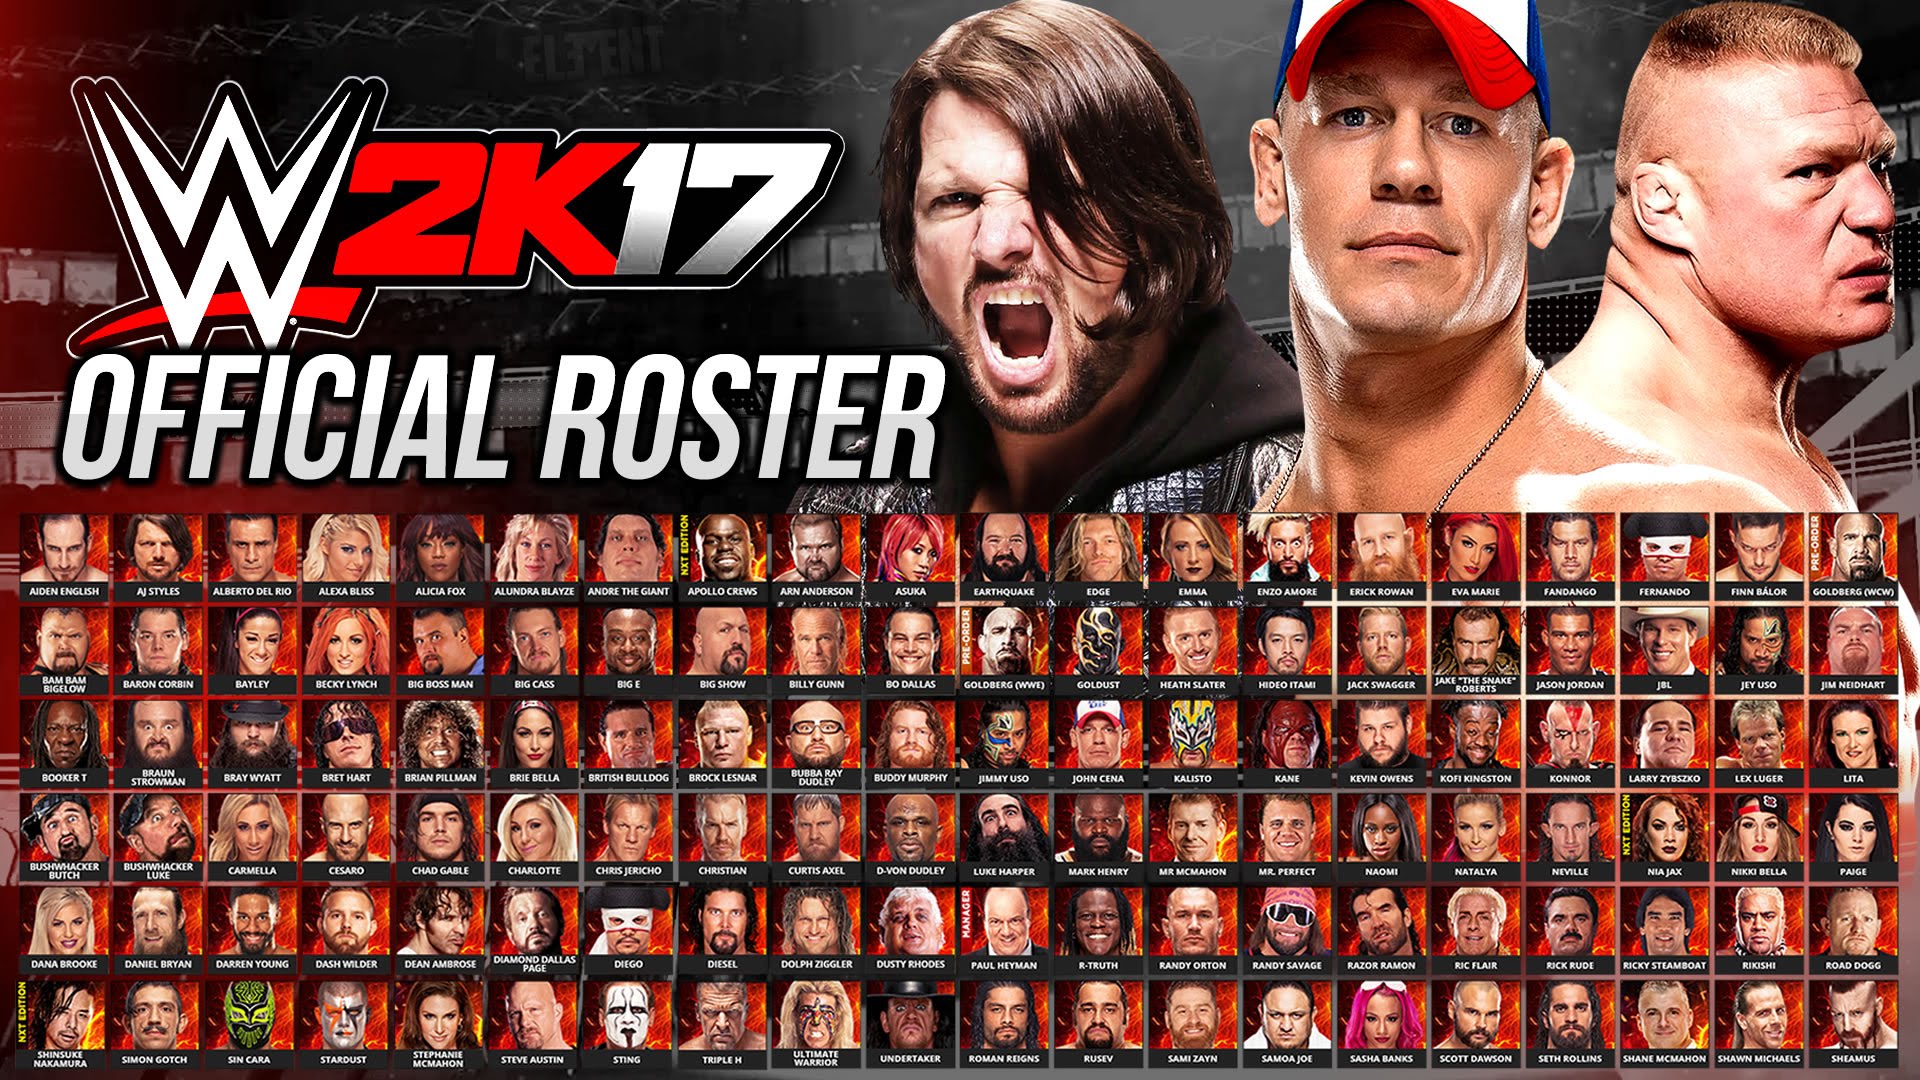 can you get wwe 2k17 on ps4